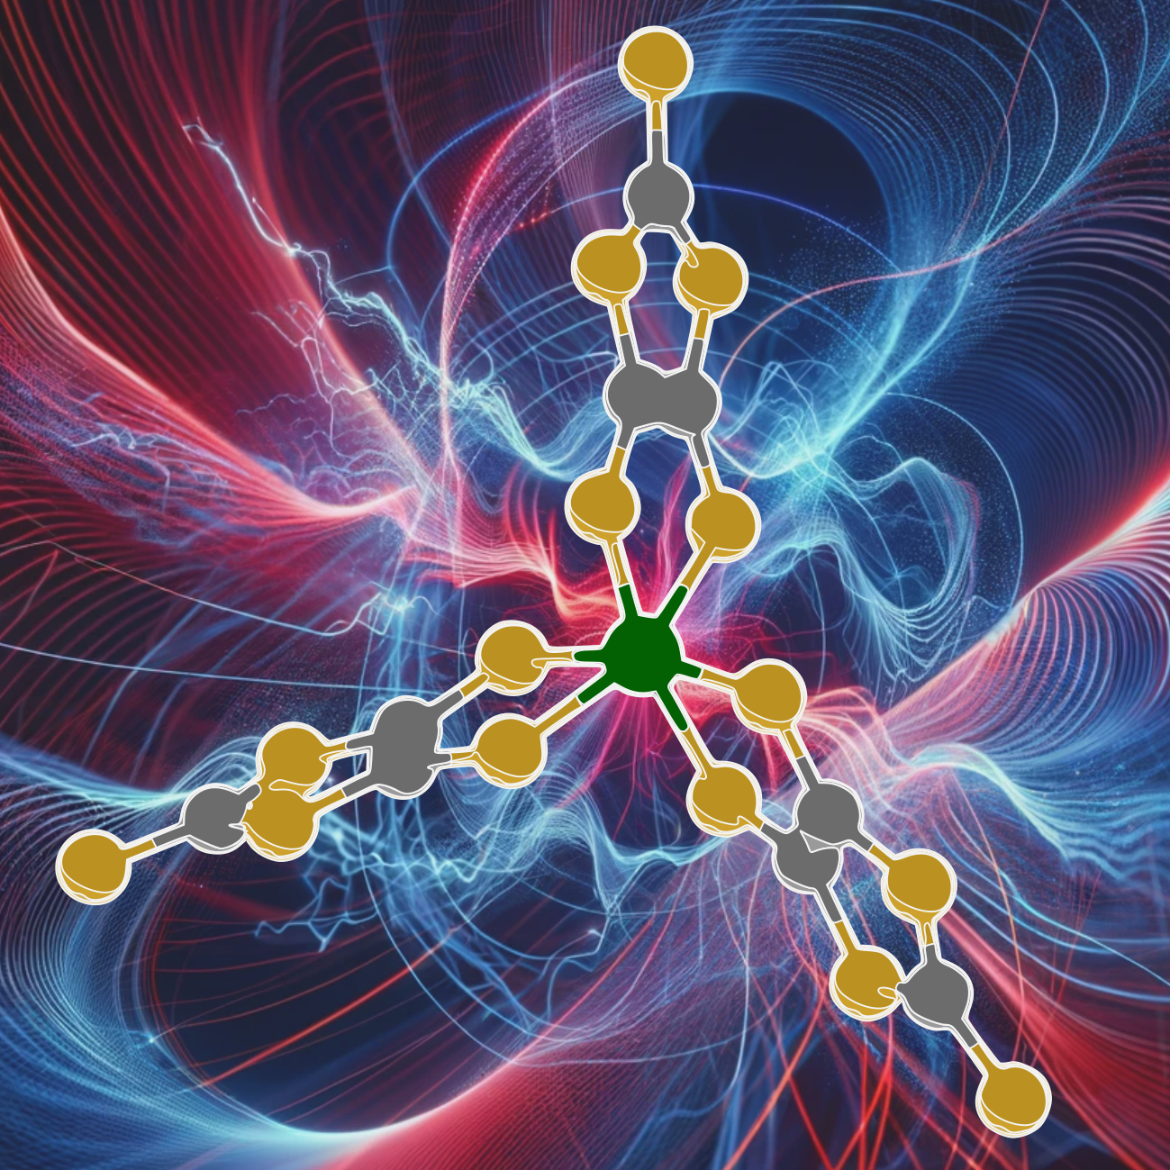 Molecular spin qubits conceptual image, with radiation flowing on the back